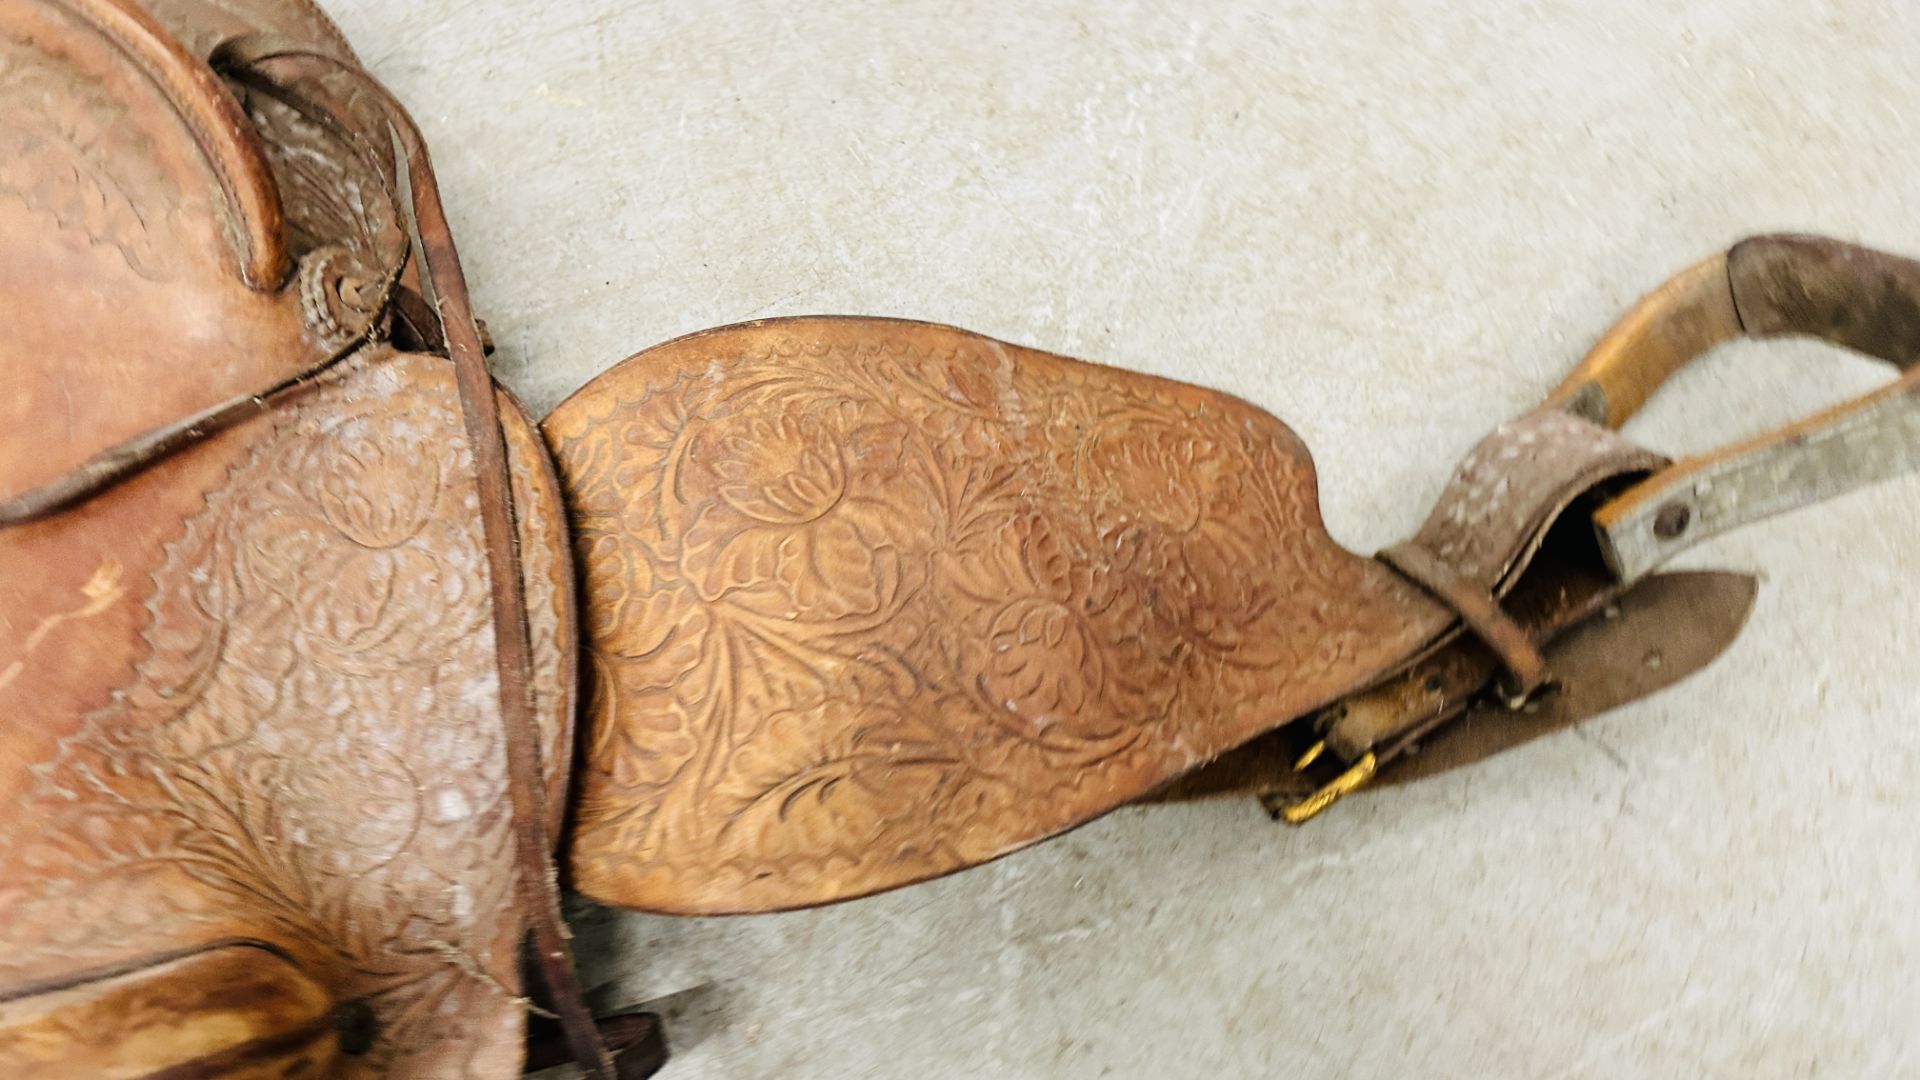 A VINTAGE WESTERN COWBOY SADDLE, THE TAN LEATHER WITH EMBOSSED DECORATION. - Image 7 of 11